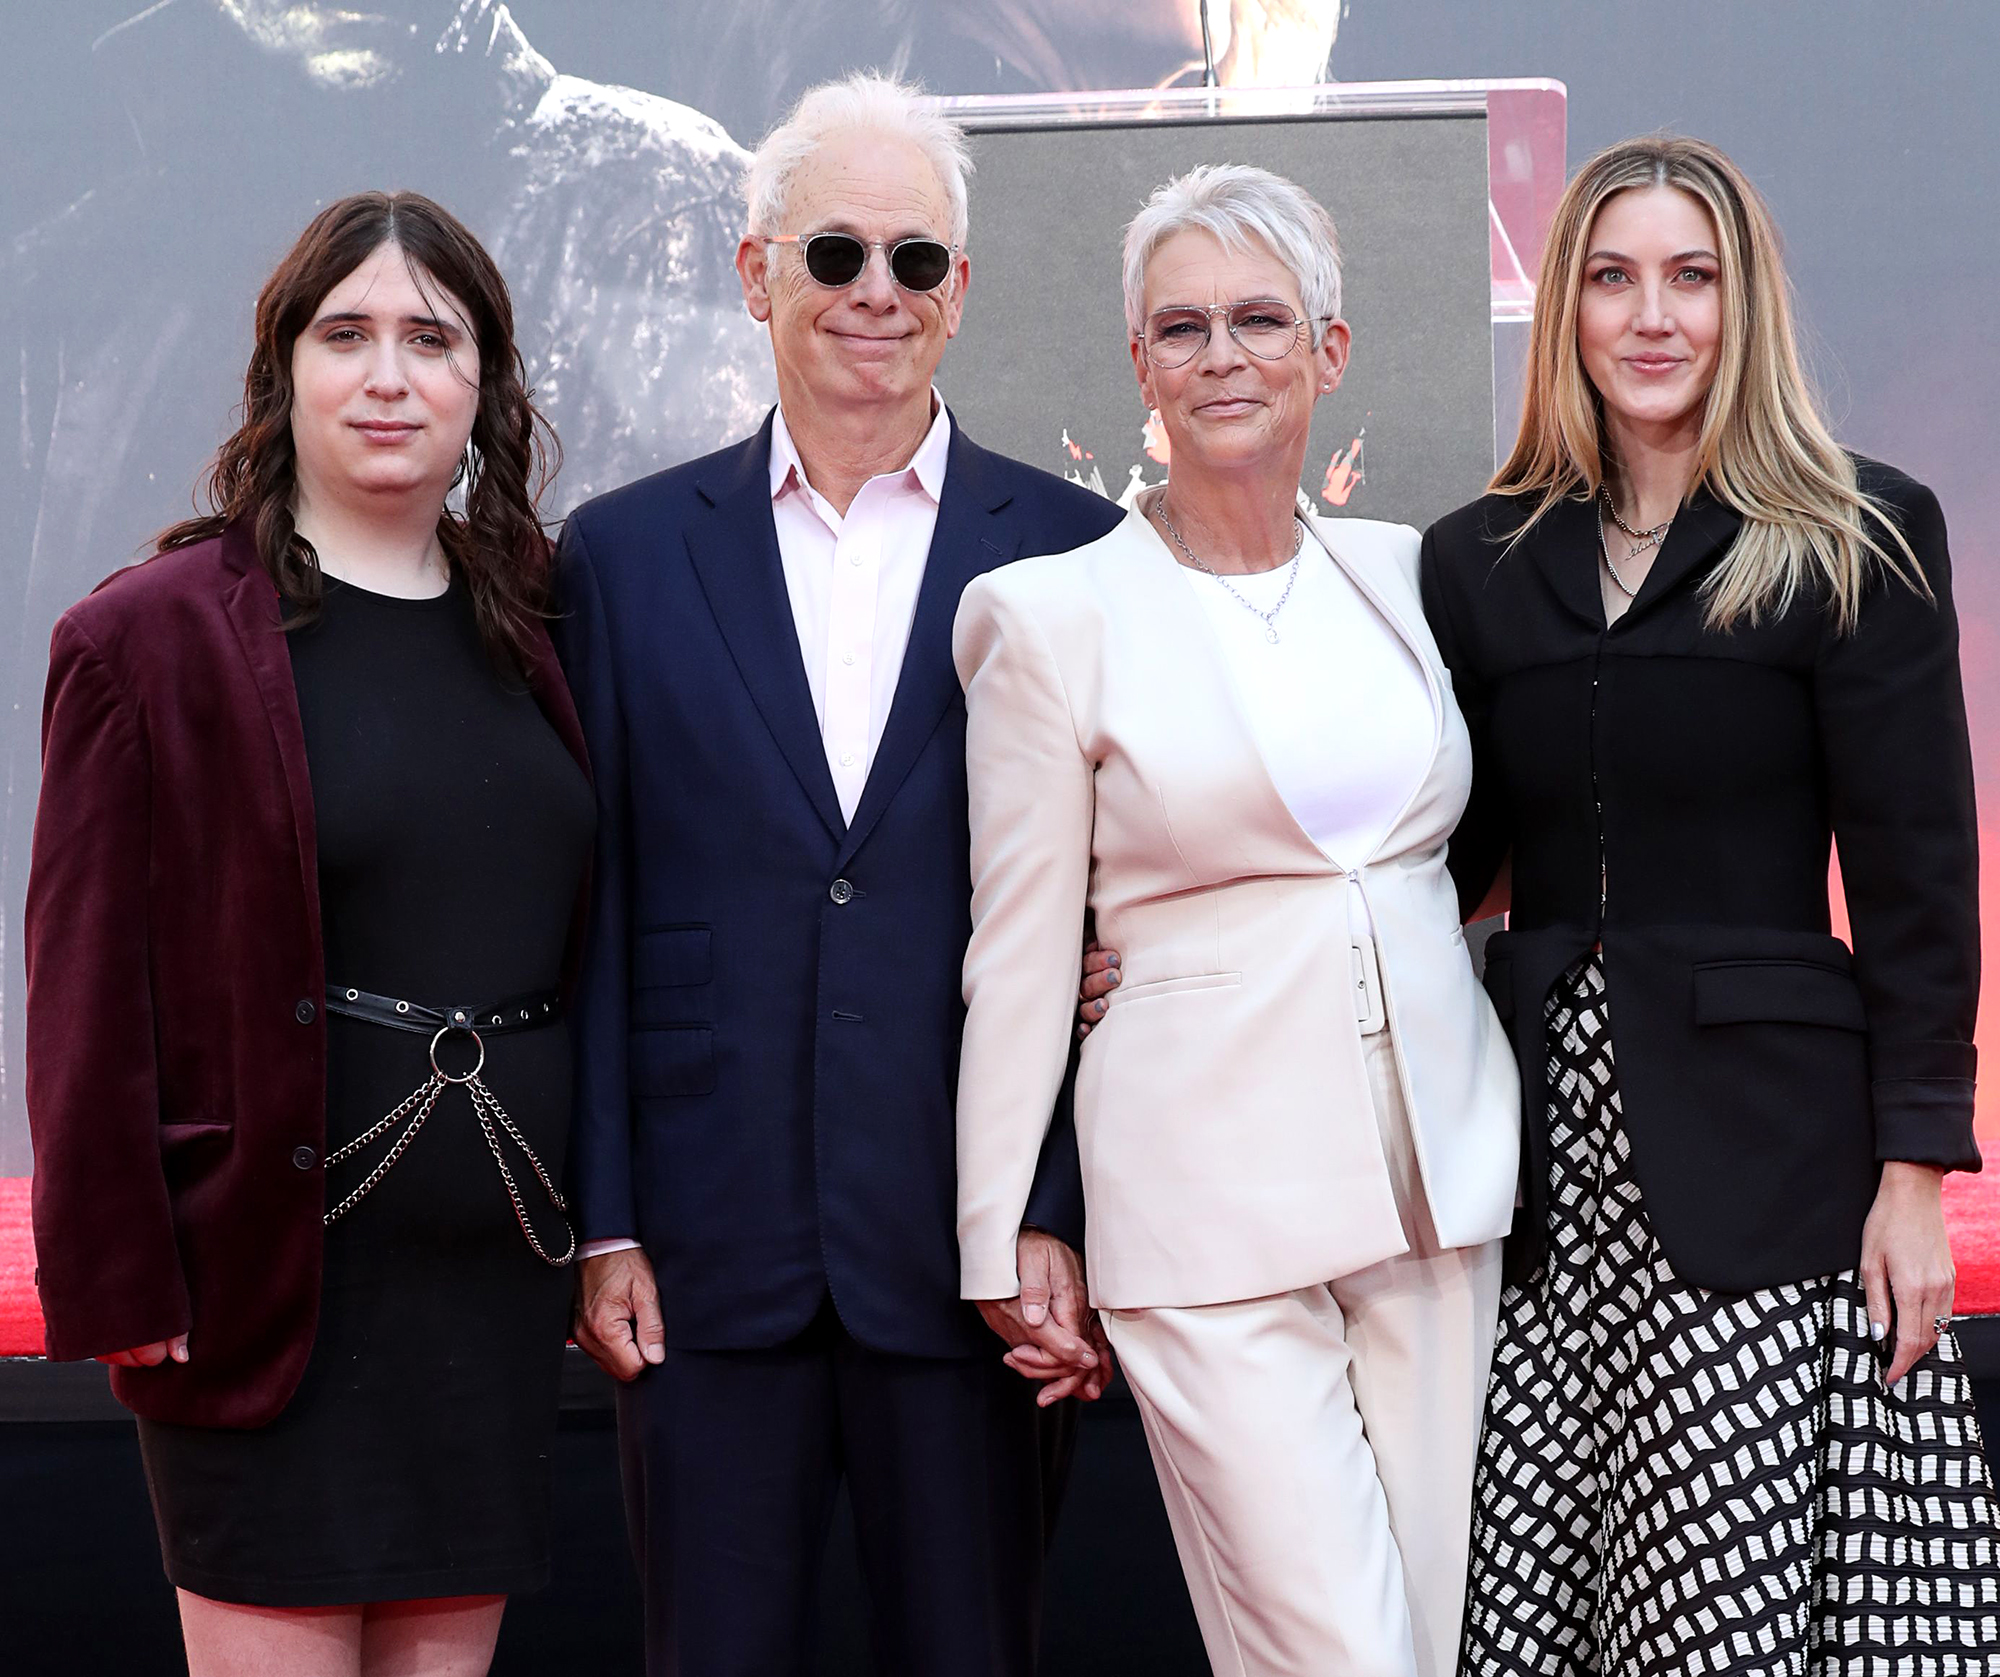 Jamie Lee Curtis' Family Album with Husband and Daughters: Pics